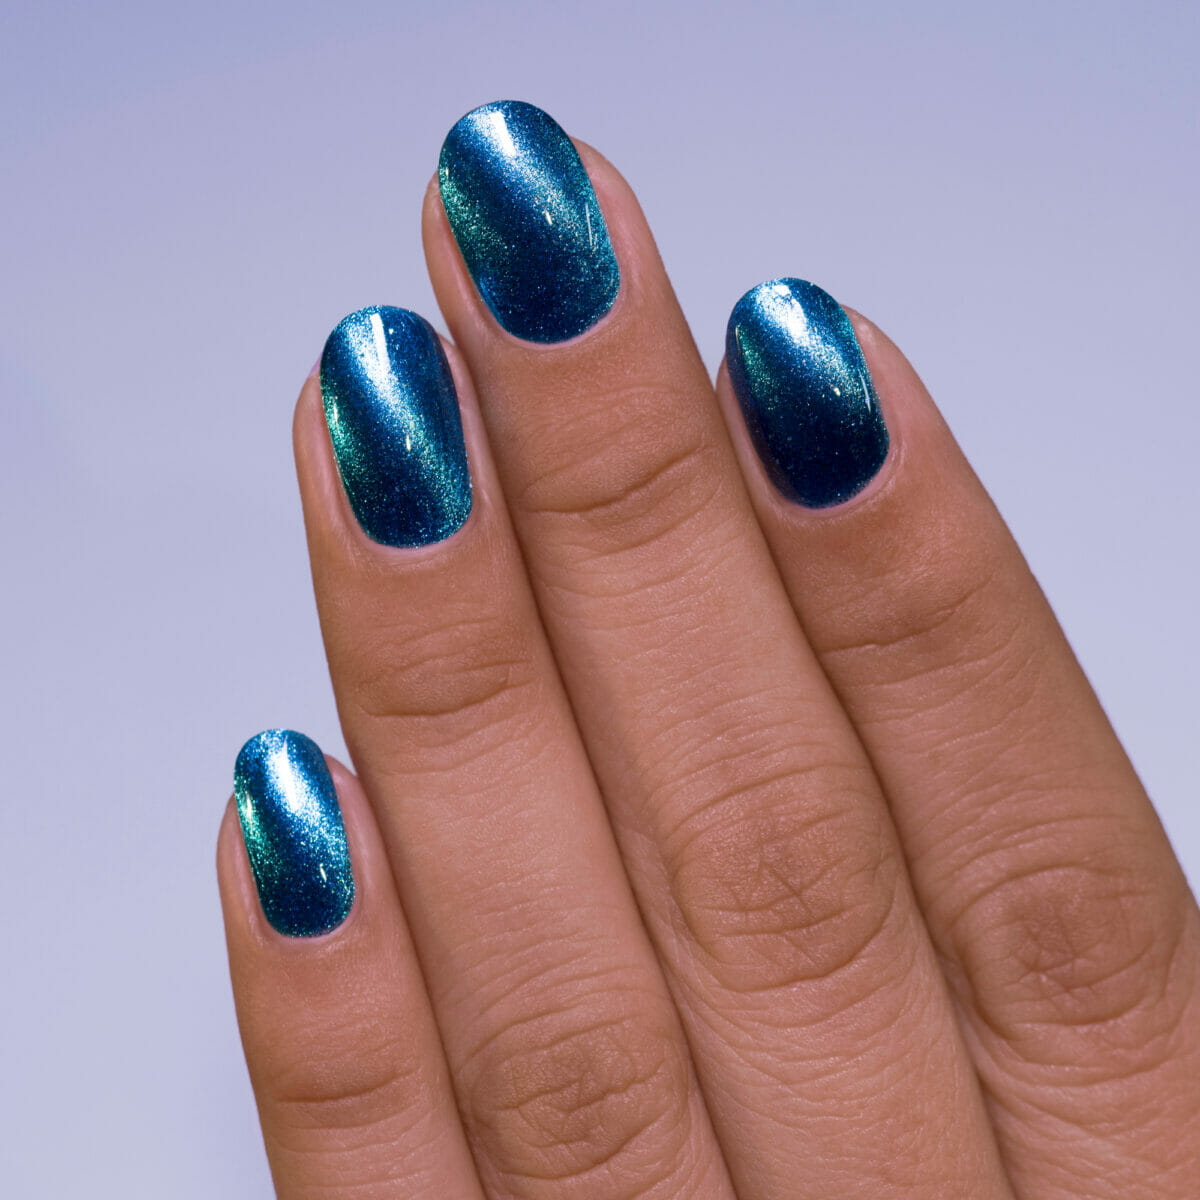 Zero Degrees - Midnight Blue Magnetic Nail Polish by ILNP